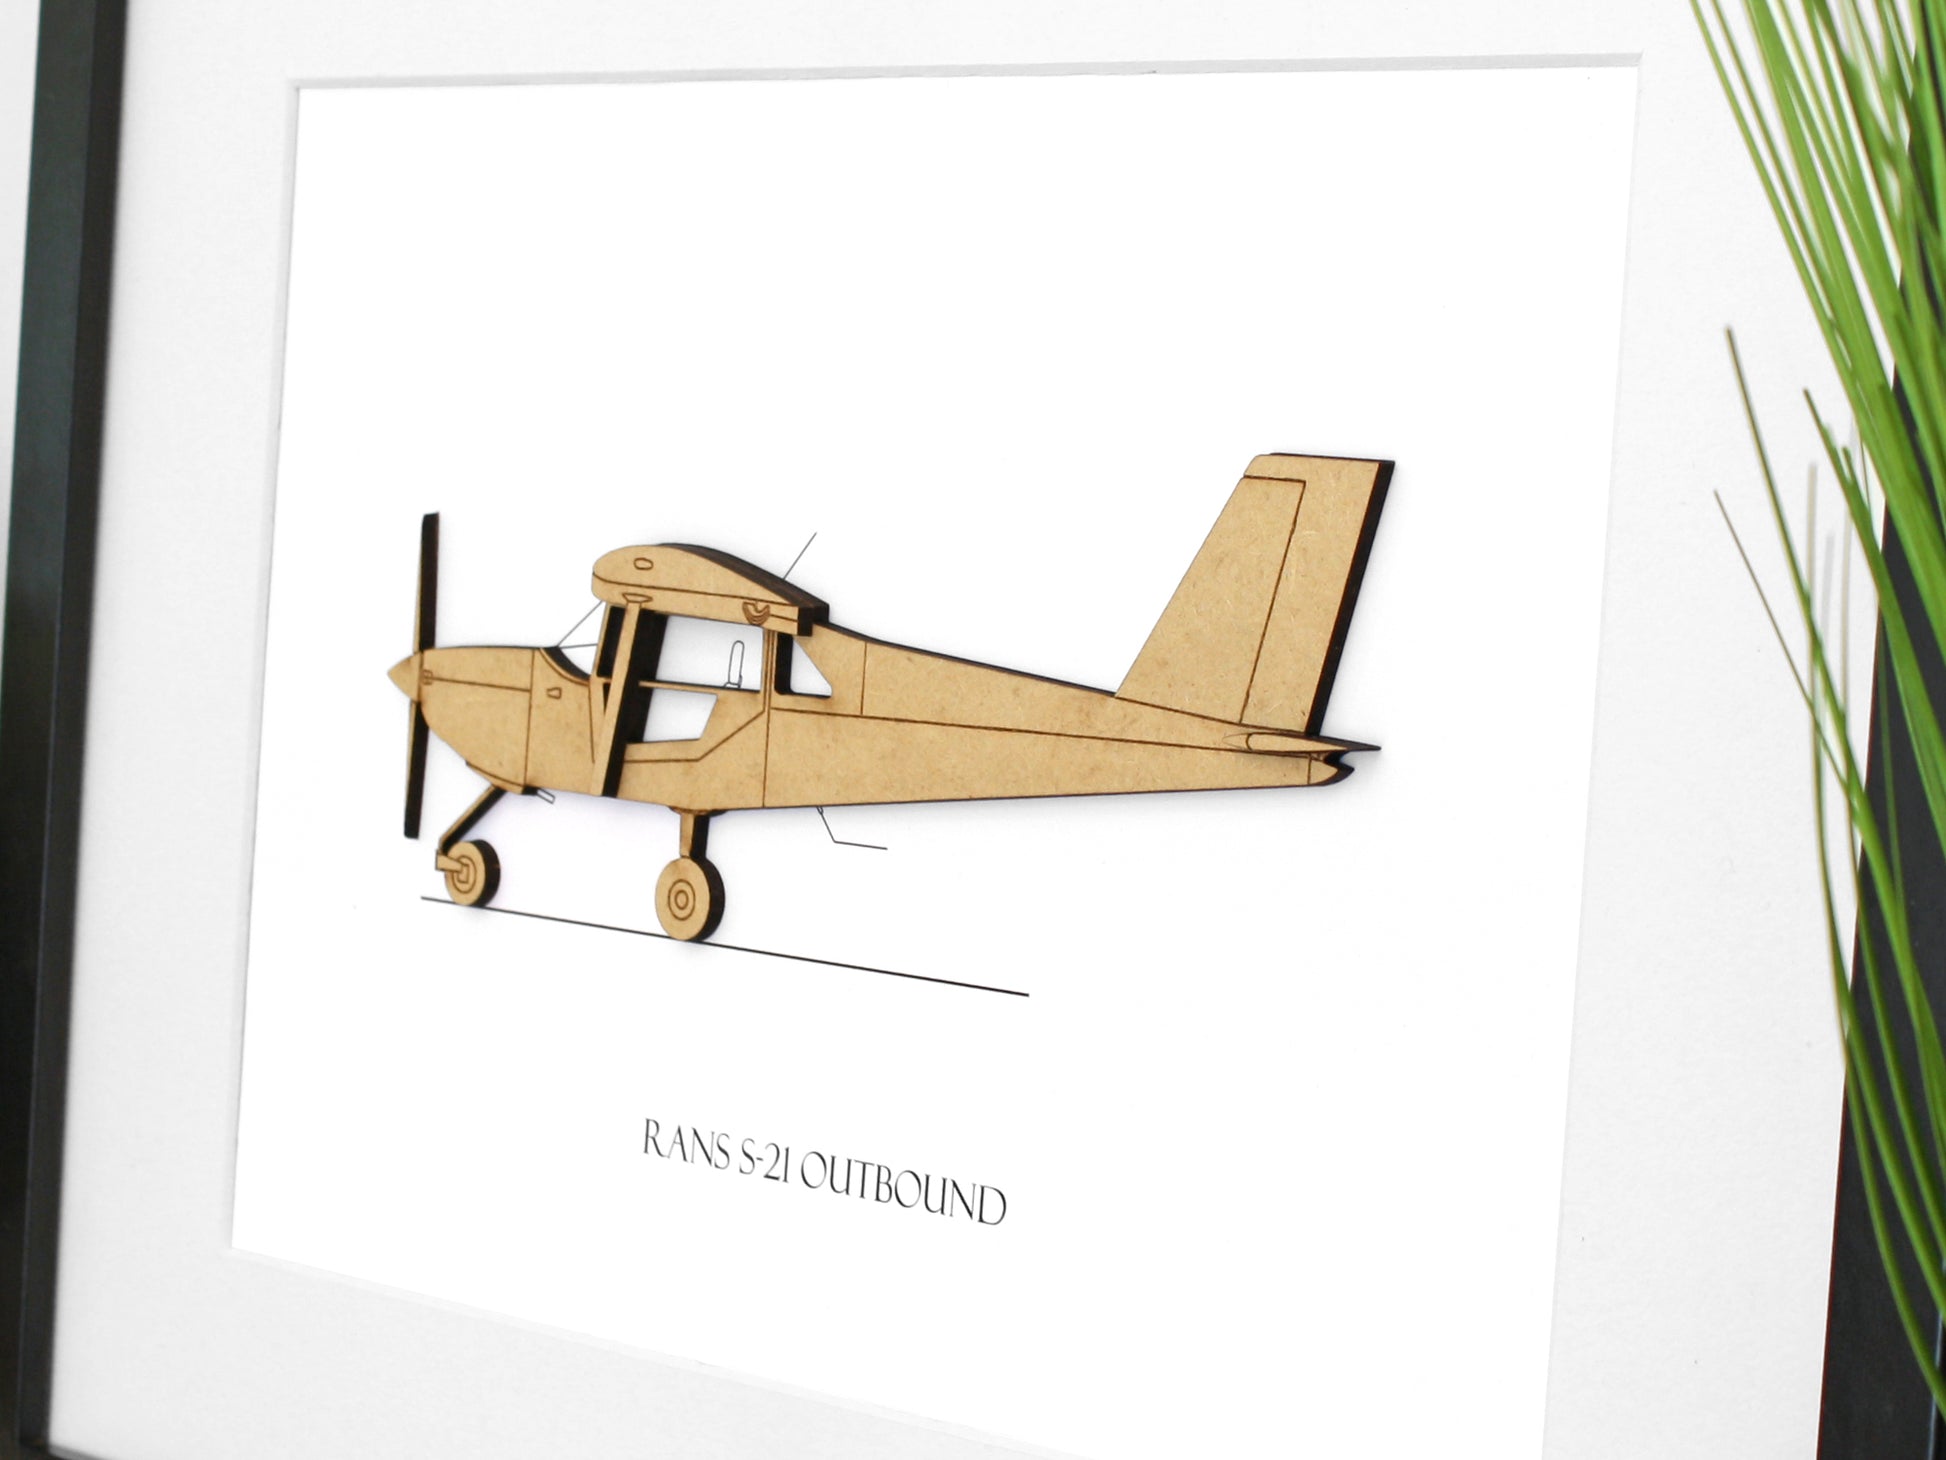 Rans S21 Outbound aviation gifts